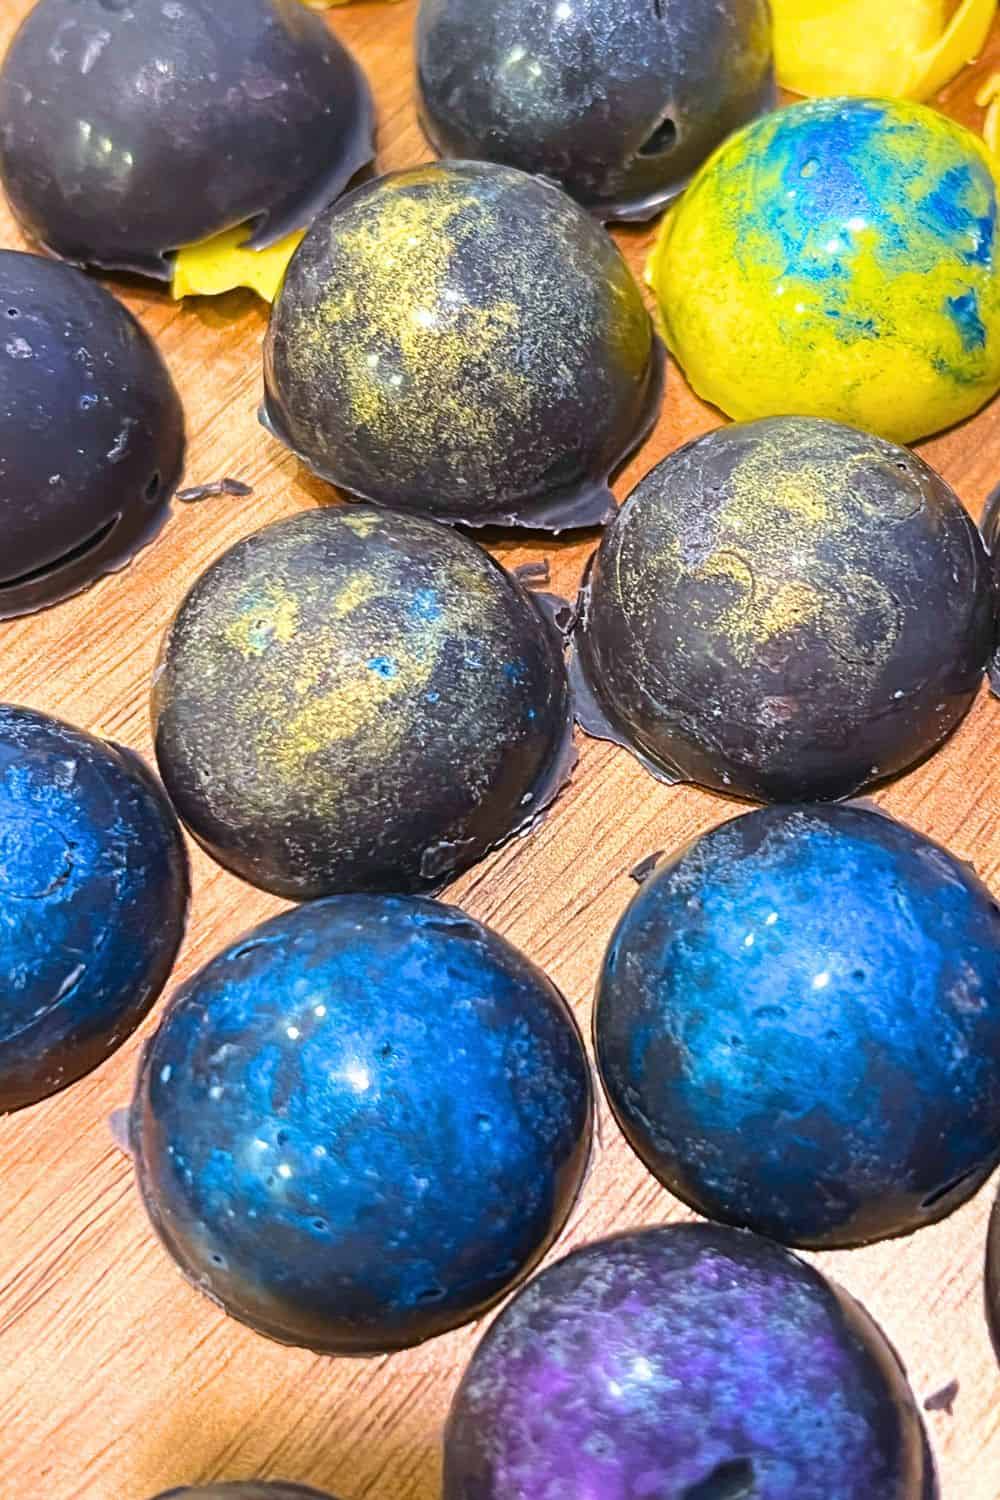 Using Glitter Luster Dust for Chocolates - chocolate eclipse suckers with luster dust to look like galaxies